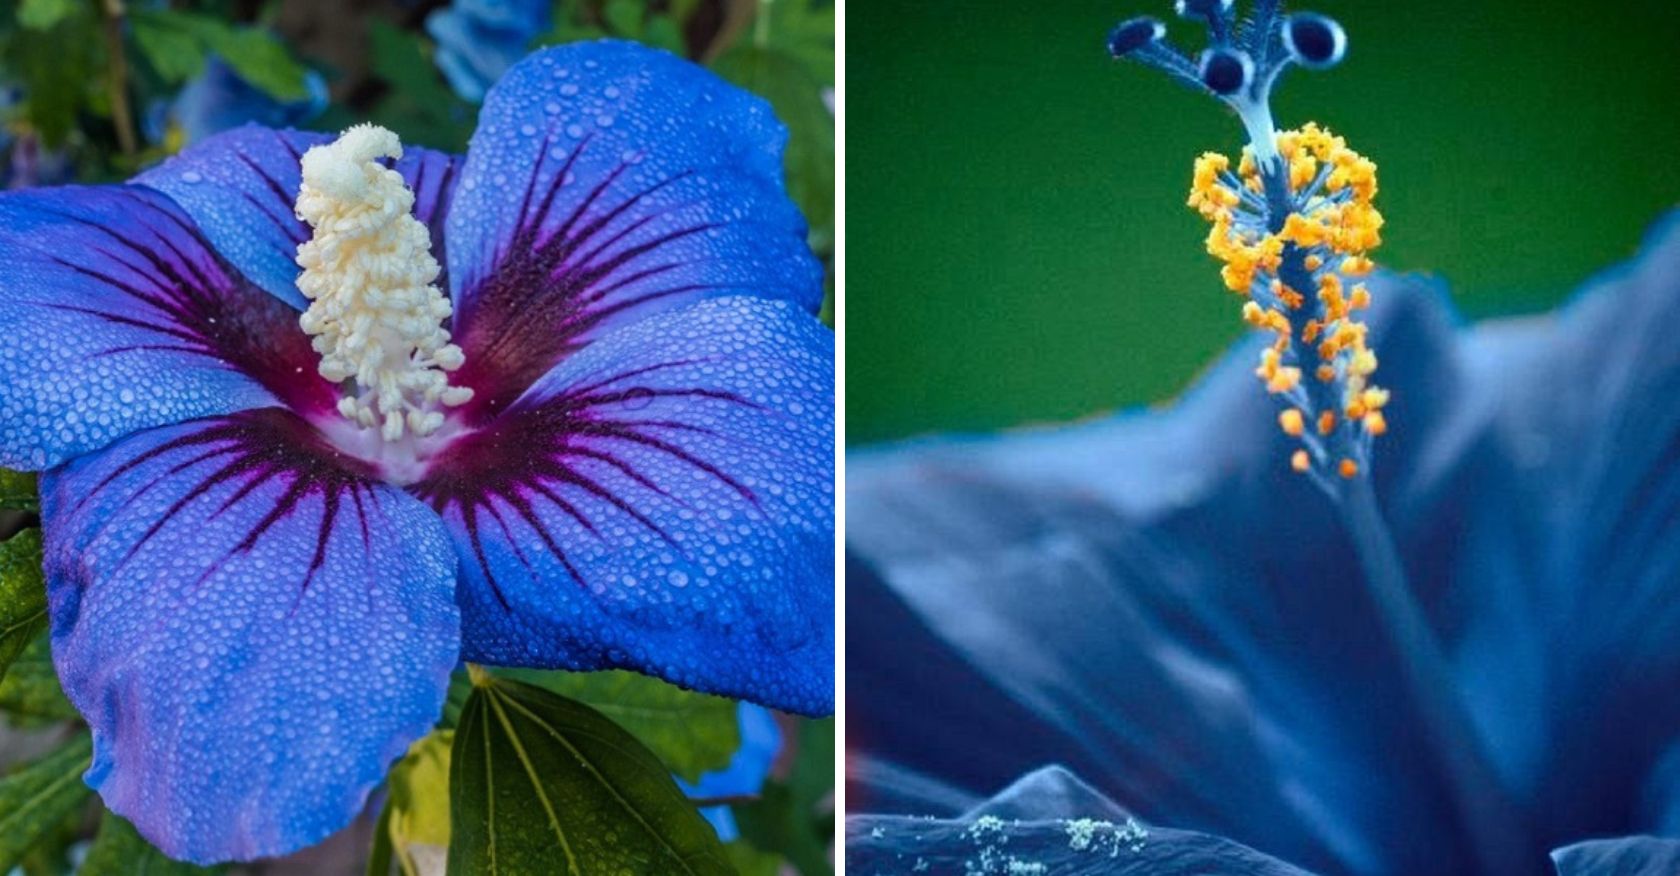 Harmonious Indigo Melody: Nature's Grace Embracing the Tranquil Symphony of Hibiscus Blooms